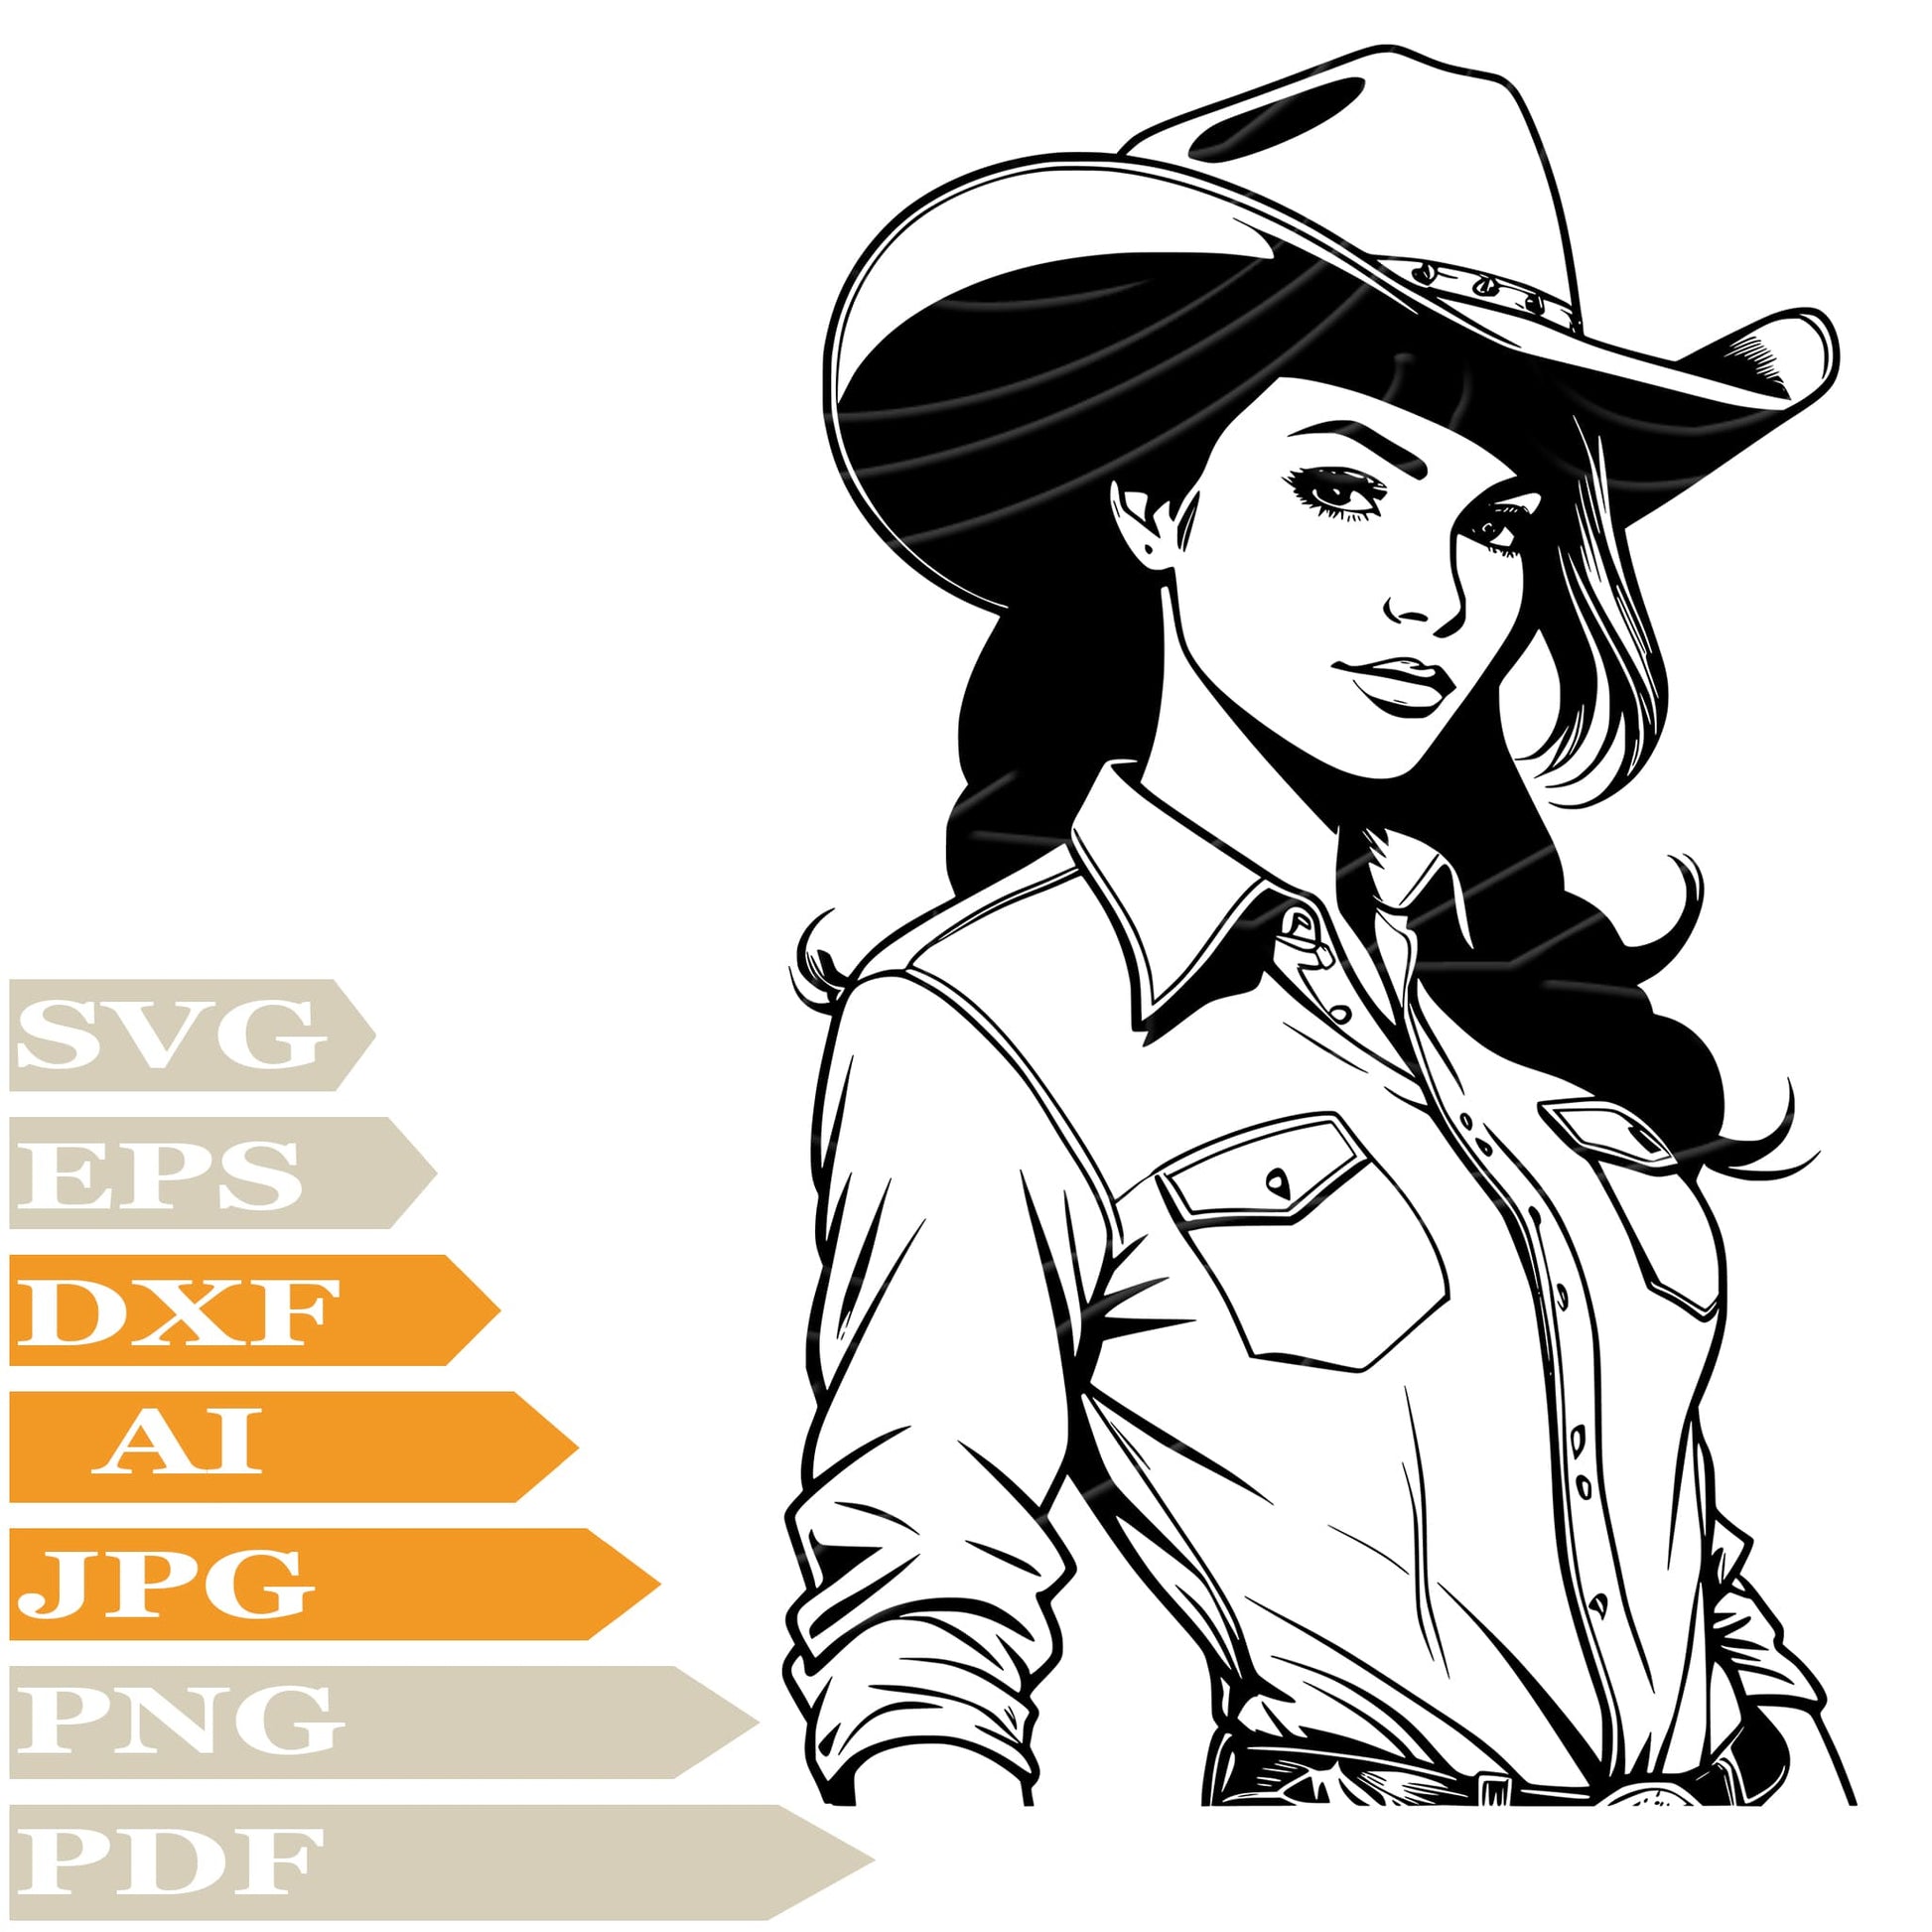 Cowgirl SVG File - Country Cowgirl Vector Graphics - Cowgirl With Hat SVG Design - Cowgirl PNG-Cricut-Cut File-Clipart-For Tattoo-Print-Decal-Shirt-Silhouette